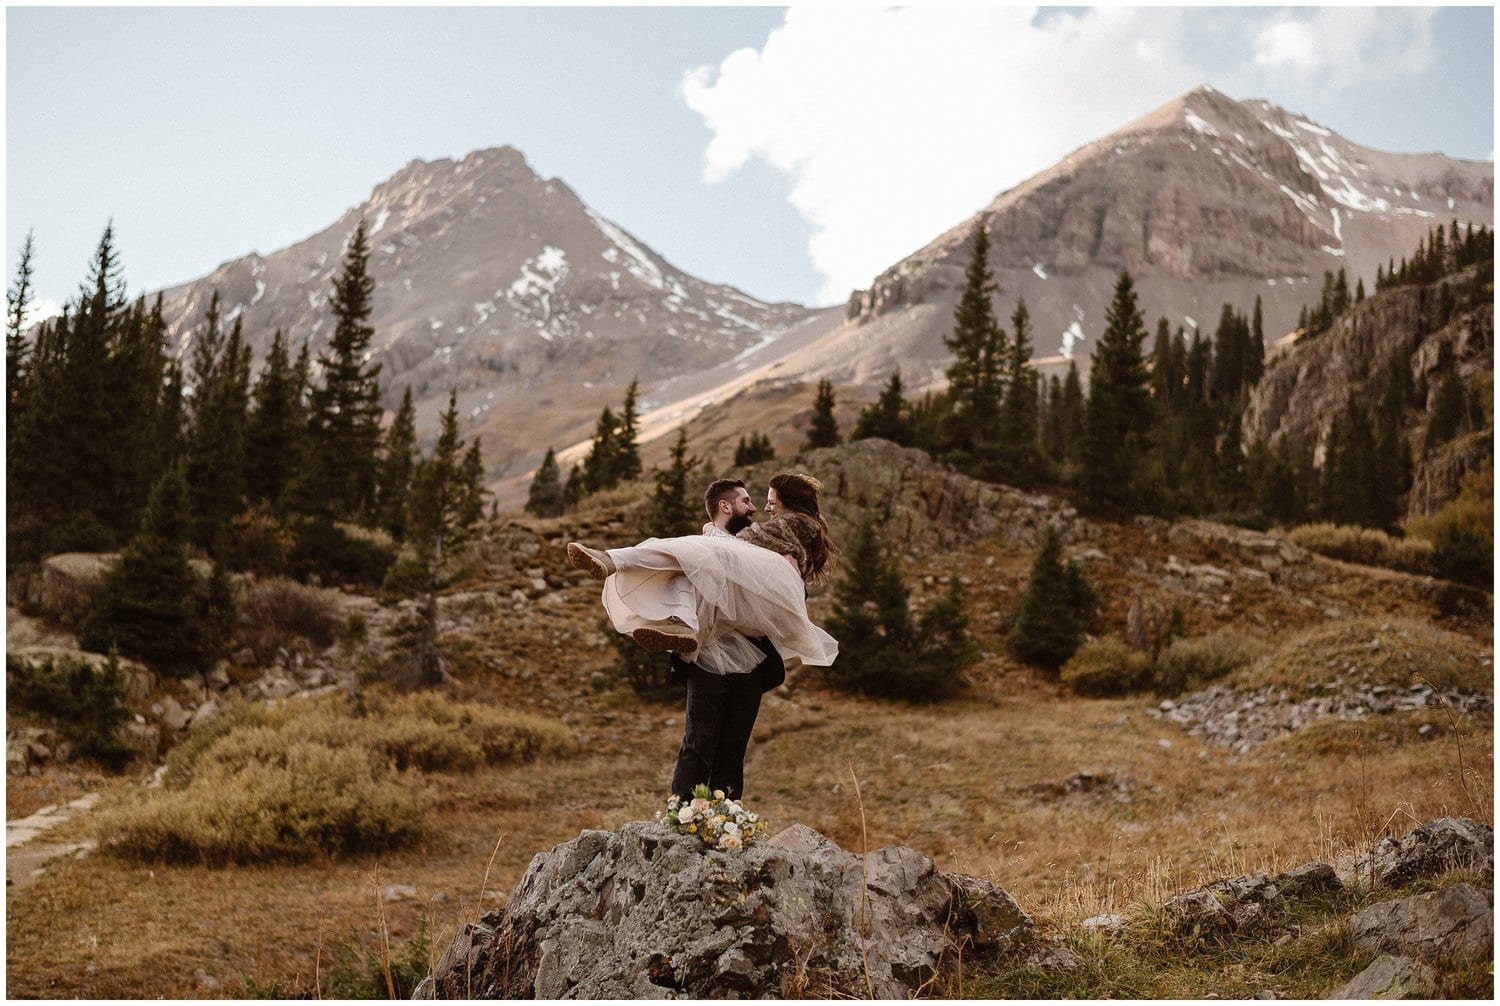 Groom lifts up bride in a meadow, with trees and mountains in the background. 